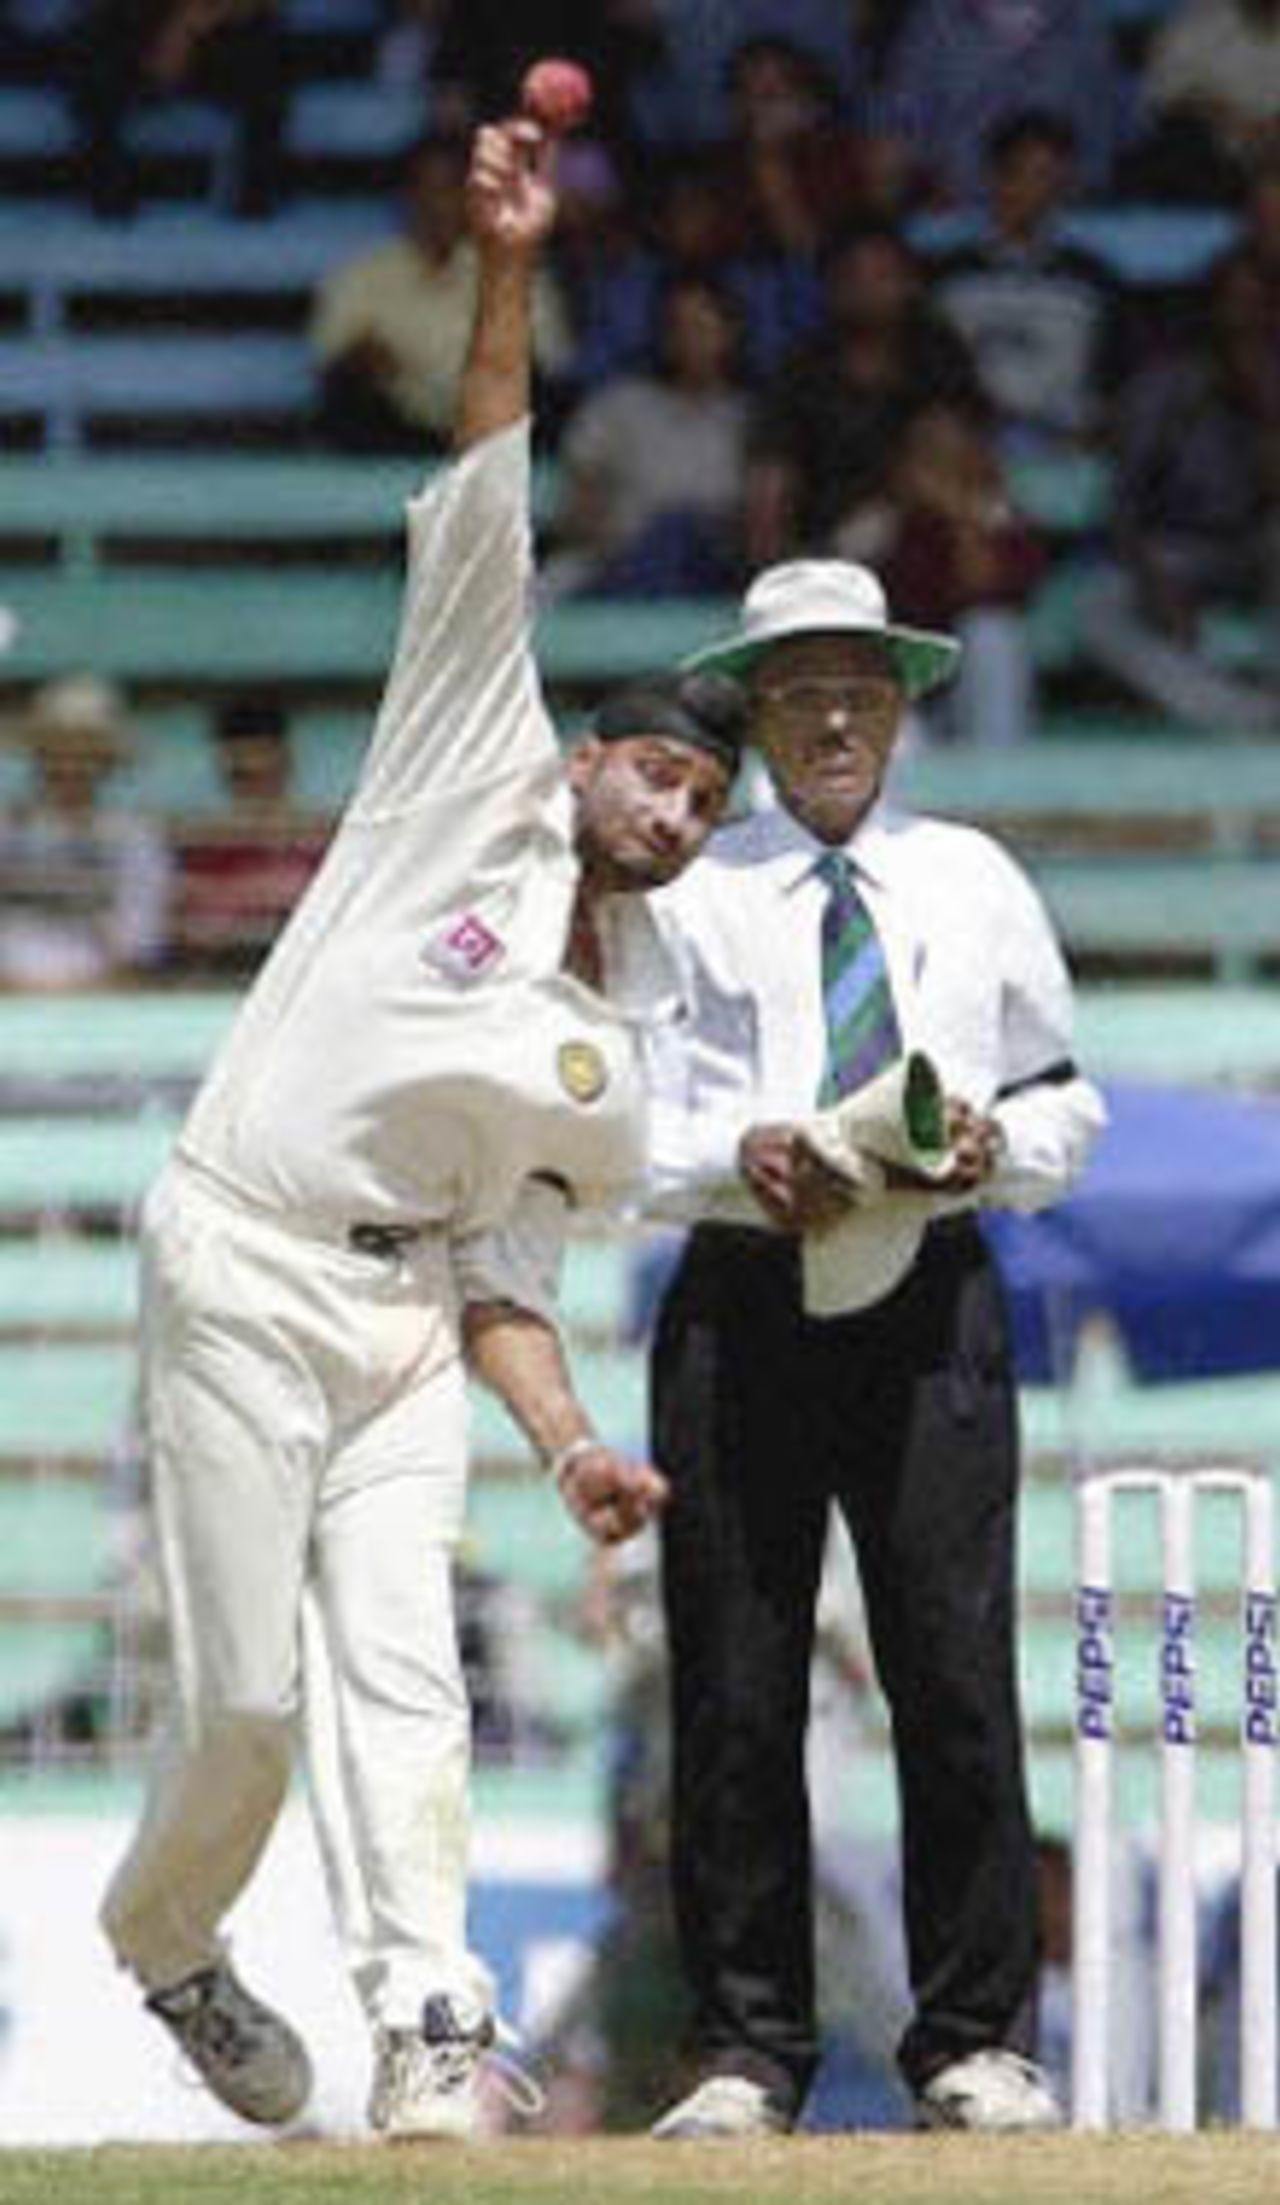 Indian spinner Harbhajan Singh bowls to Australian batsman Mark Waugh (not in the picture) as the umpire looks on during second day's play of the first test match between India and Australia at Wankhade stadium in Bombay 28 February 2001. Harbhajan Singh claimed three early Australian wickets however with the help of centuries from batsmen Matthew Hayden and Adam Gilchrist and put Australia in a strong position at 319 for 6 after lunch in reply to India's 176 runs.